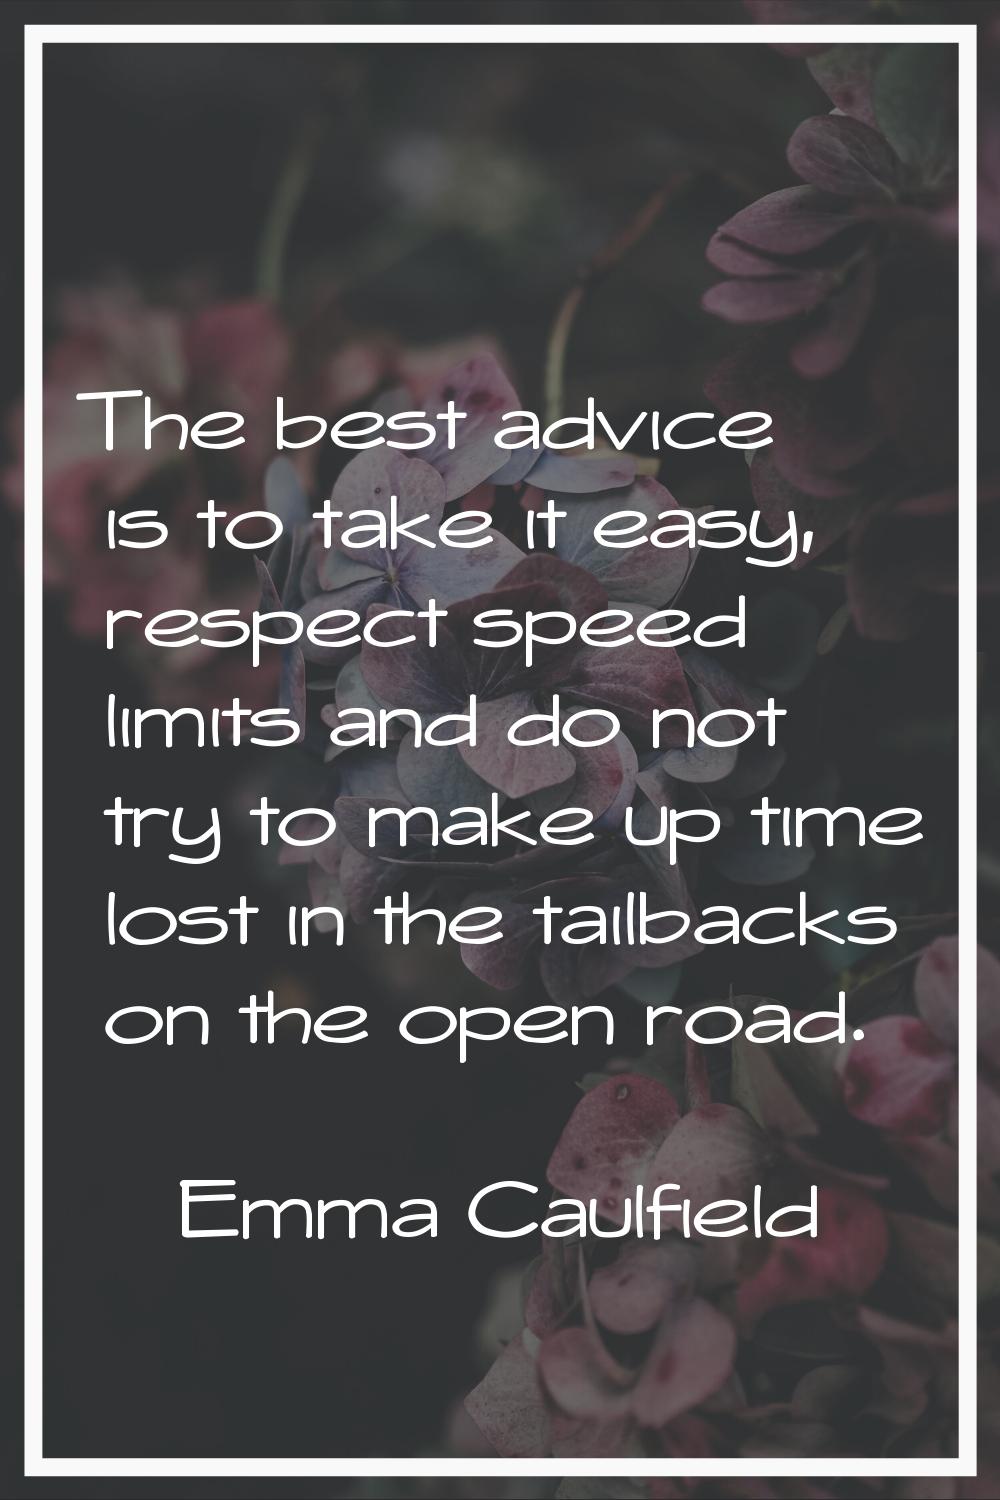 The best advice is to take it easy, respect speed limits and do not try to make up time lost in the